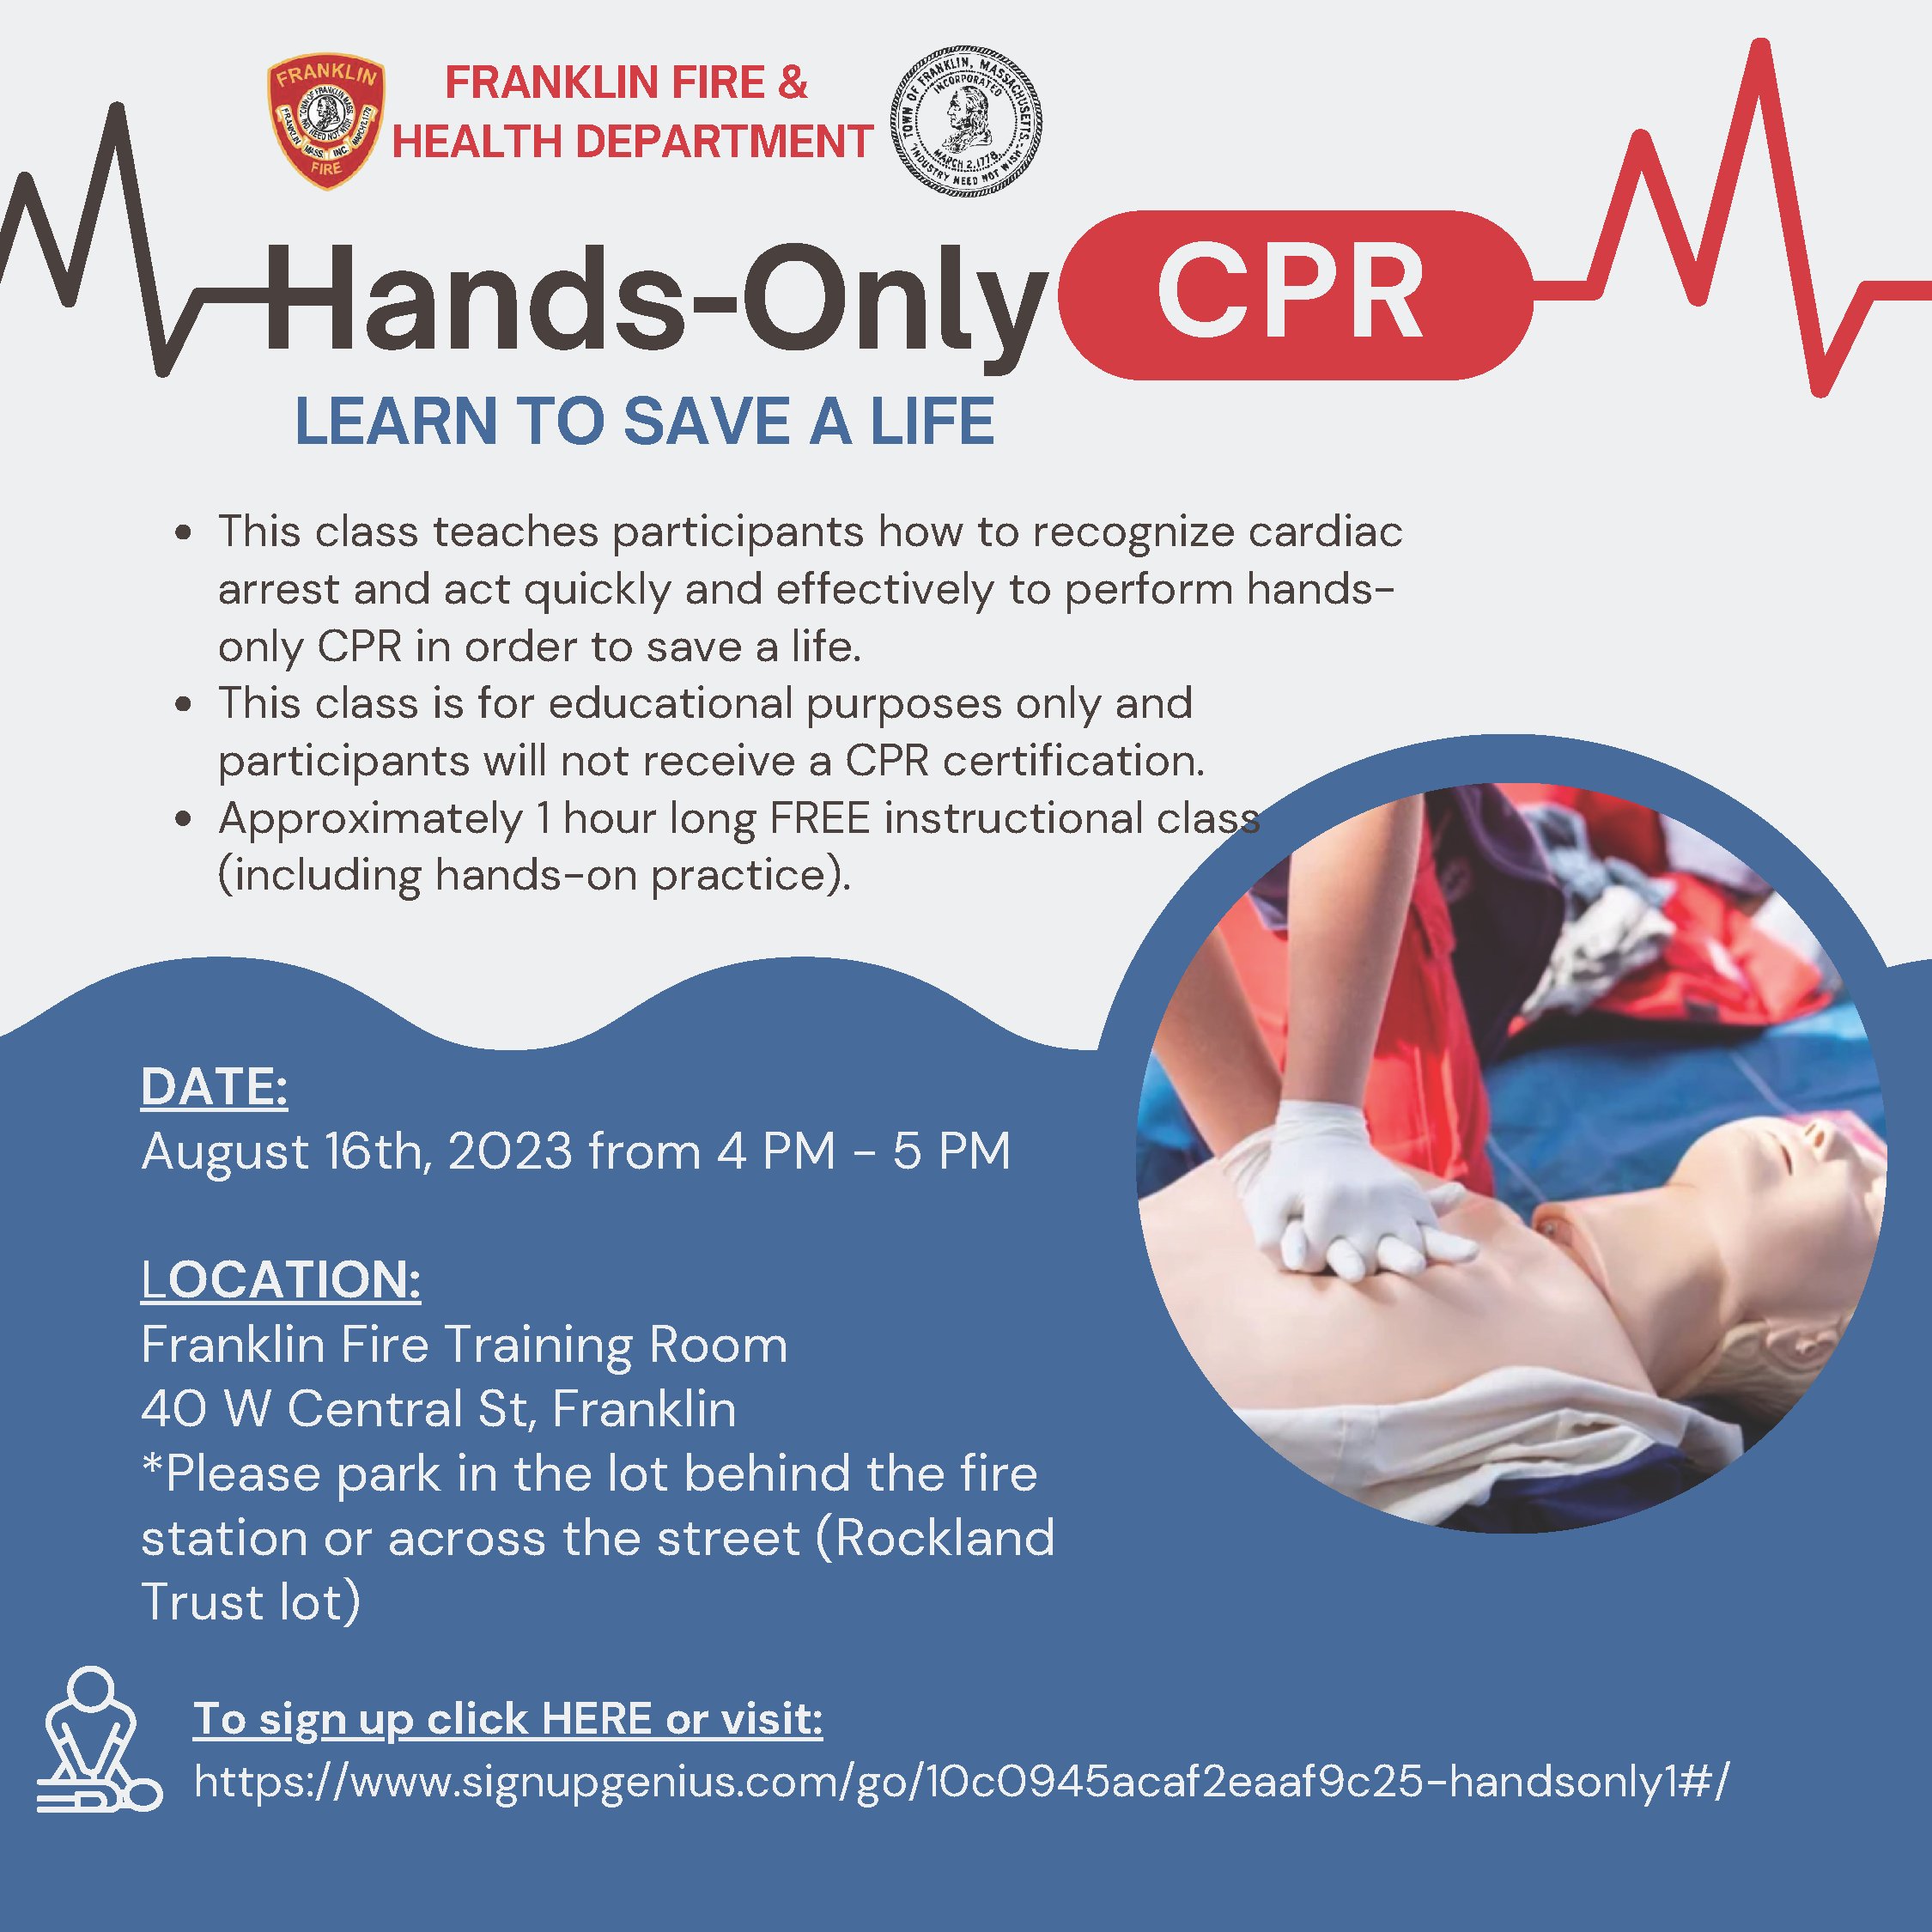 Town of Franklin, MA: Registration open for a FREE Hands Only CPR class Aug 16 - 4 PM